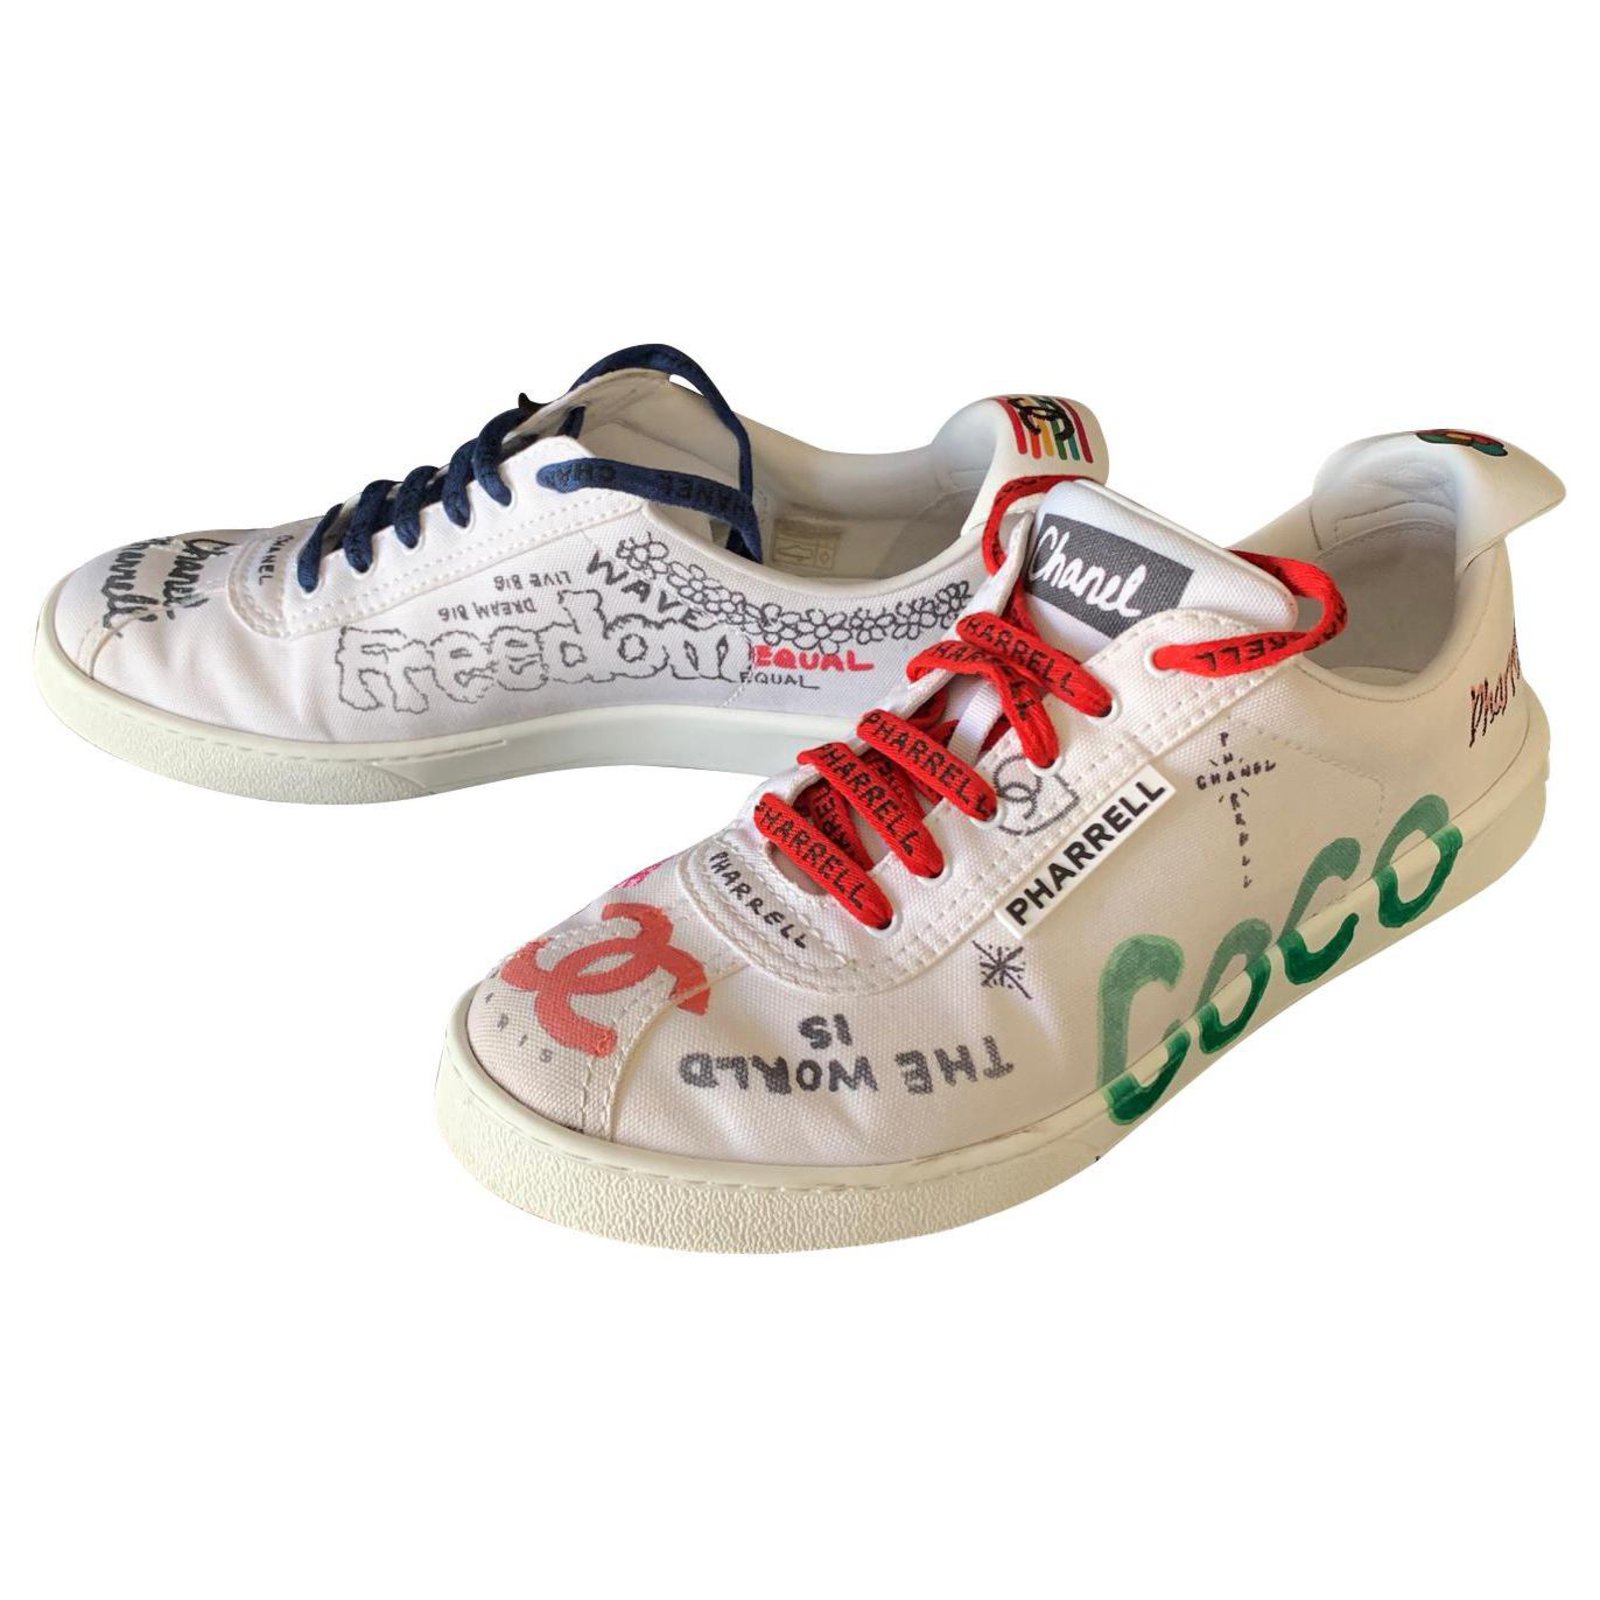 CHANEL PHARRELL sneakers Grafiti collection capsule used and worn